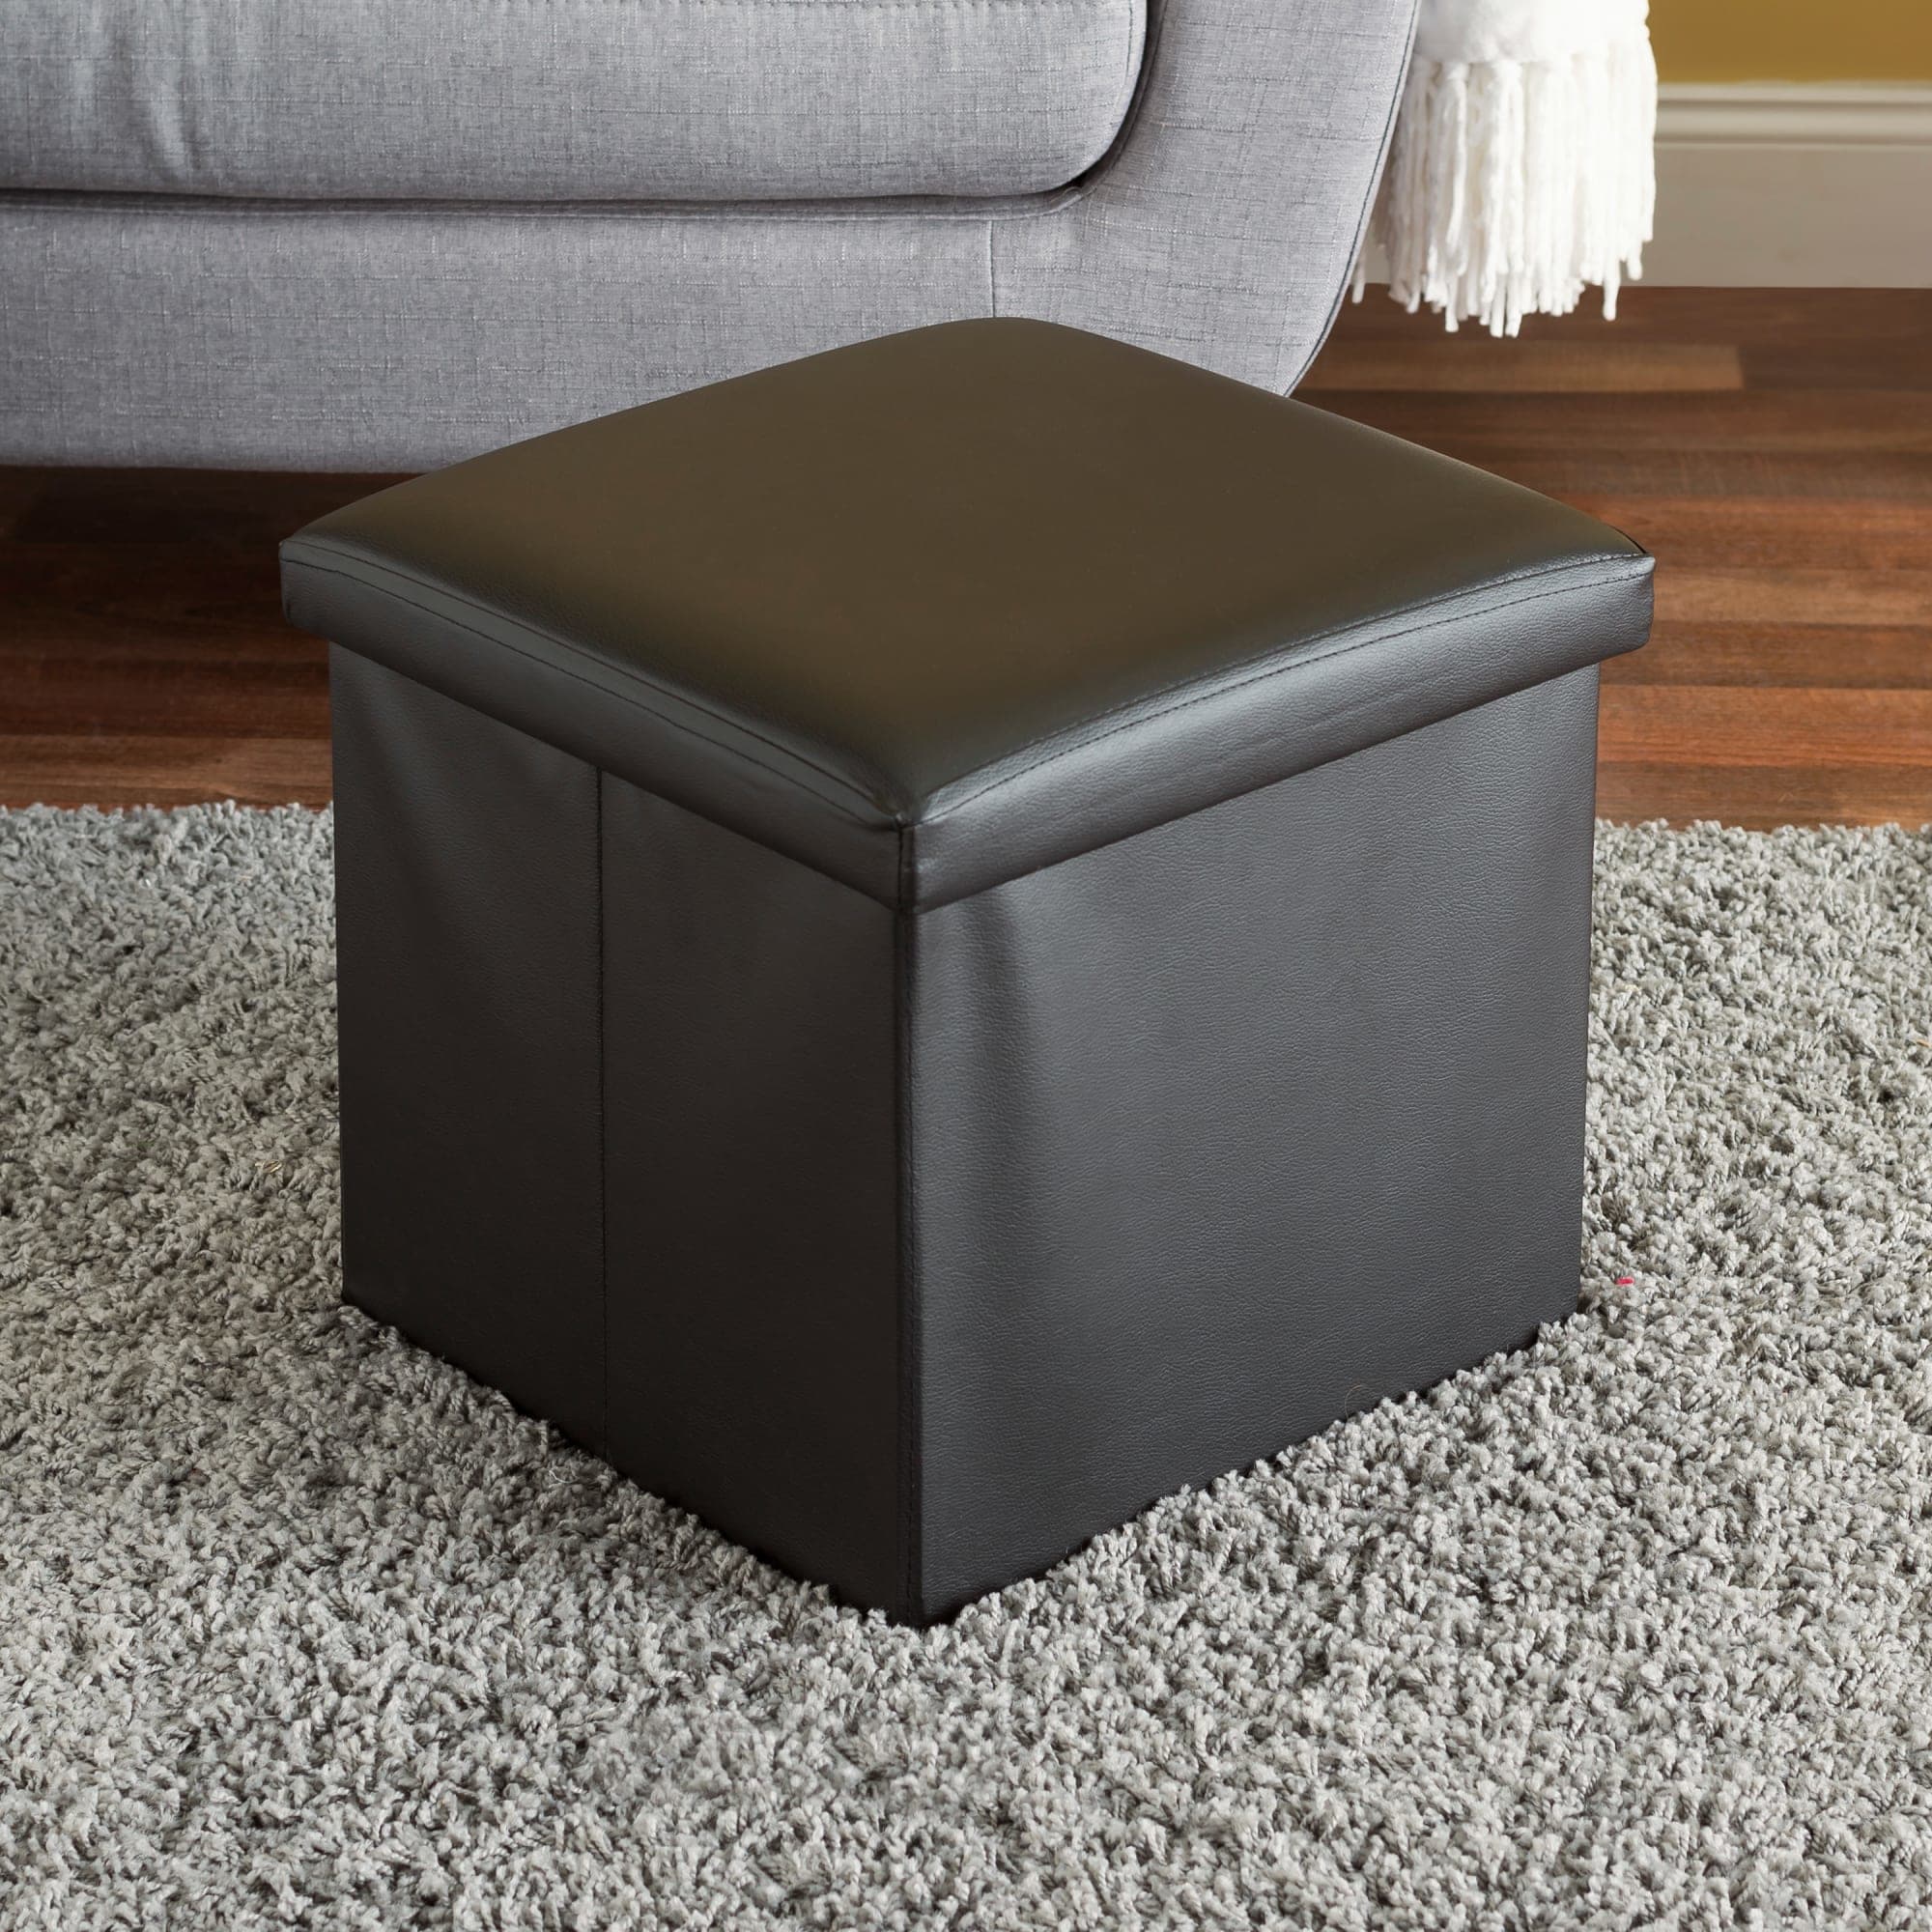 Home Basics Faux Leather Storage Cube, Black $12.00 EACH, CASE PACK OF 6